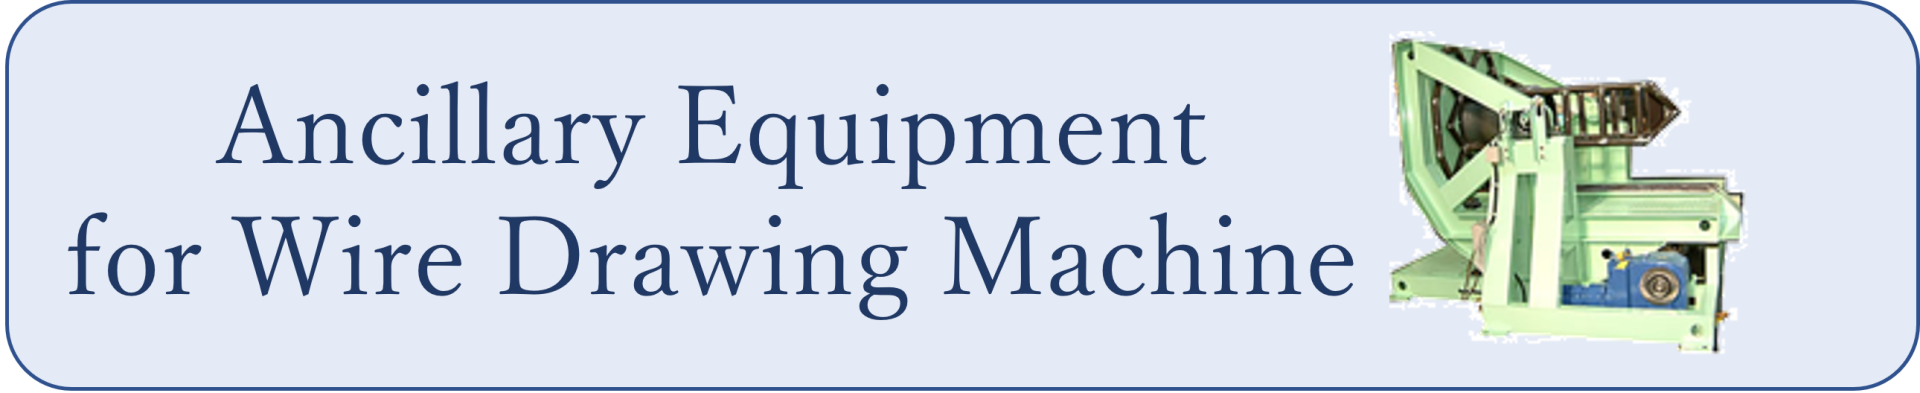 link_Ancillary Equipment for Wire Drawing Machine